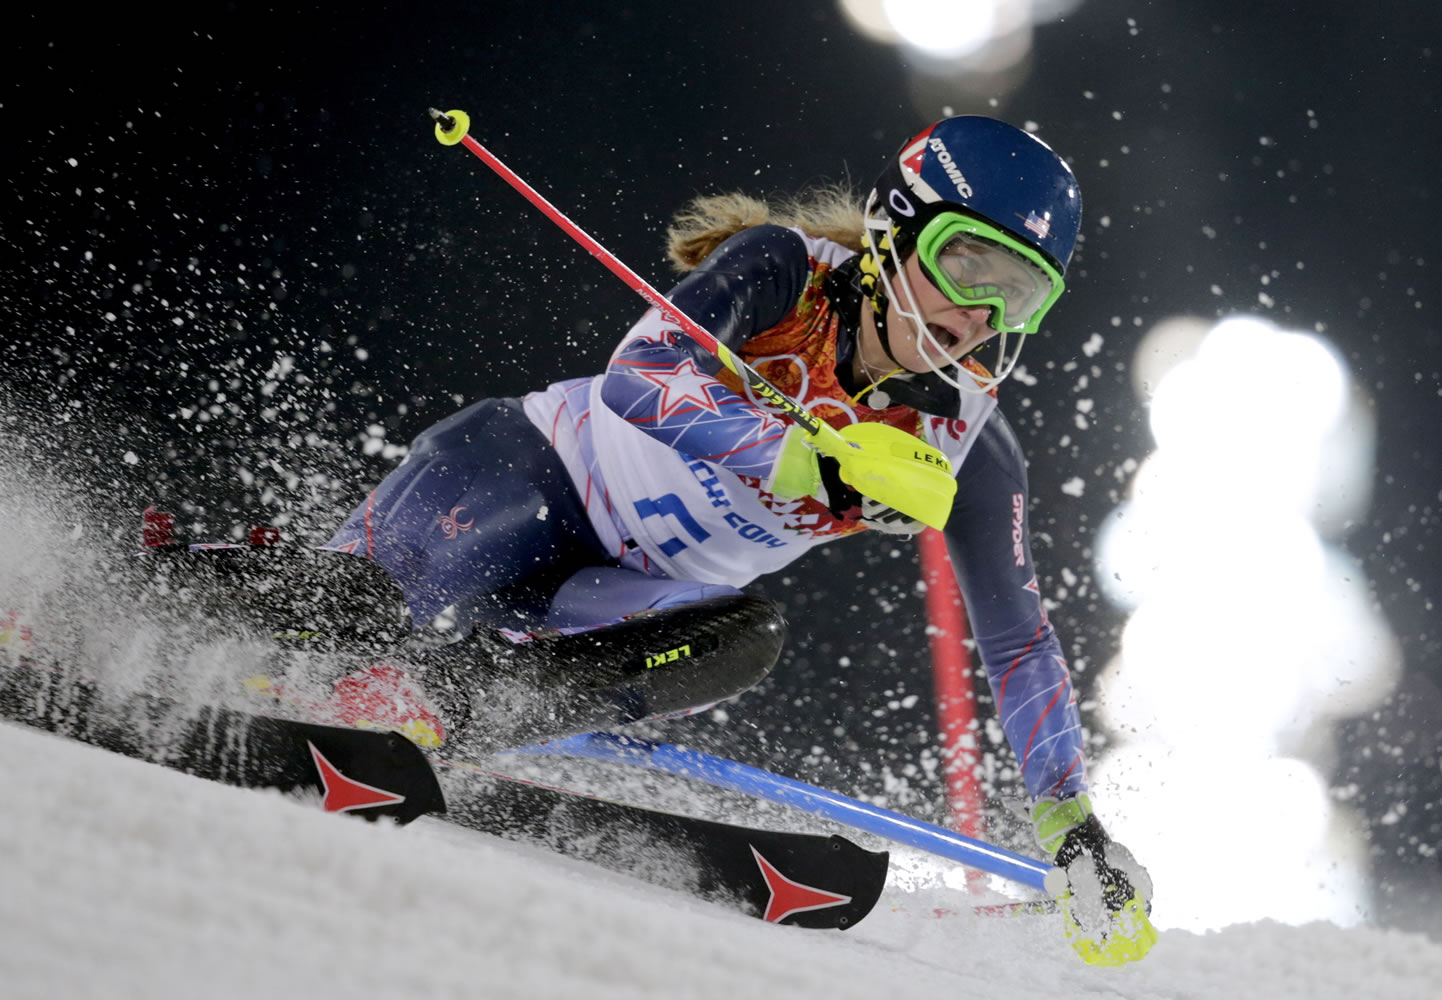 Gold medal winner Mikaela Shiffrin skis past a gate in the women's slalom at the Sochi 2014 Winter Olympics on Friday in Krasnaya Polyana, Russia.